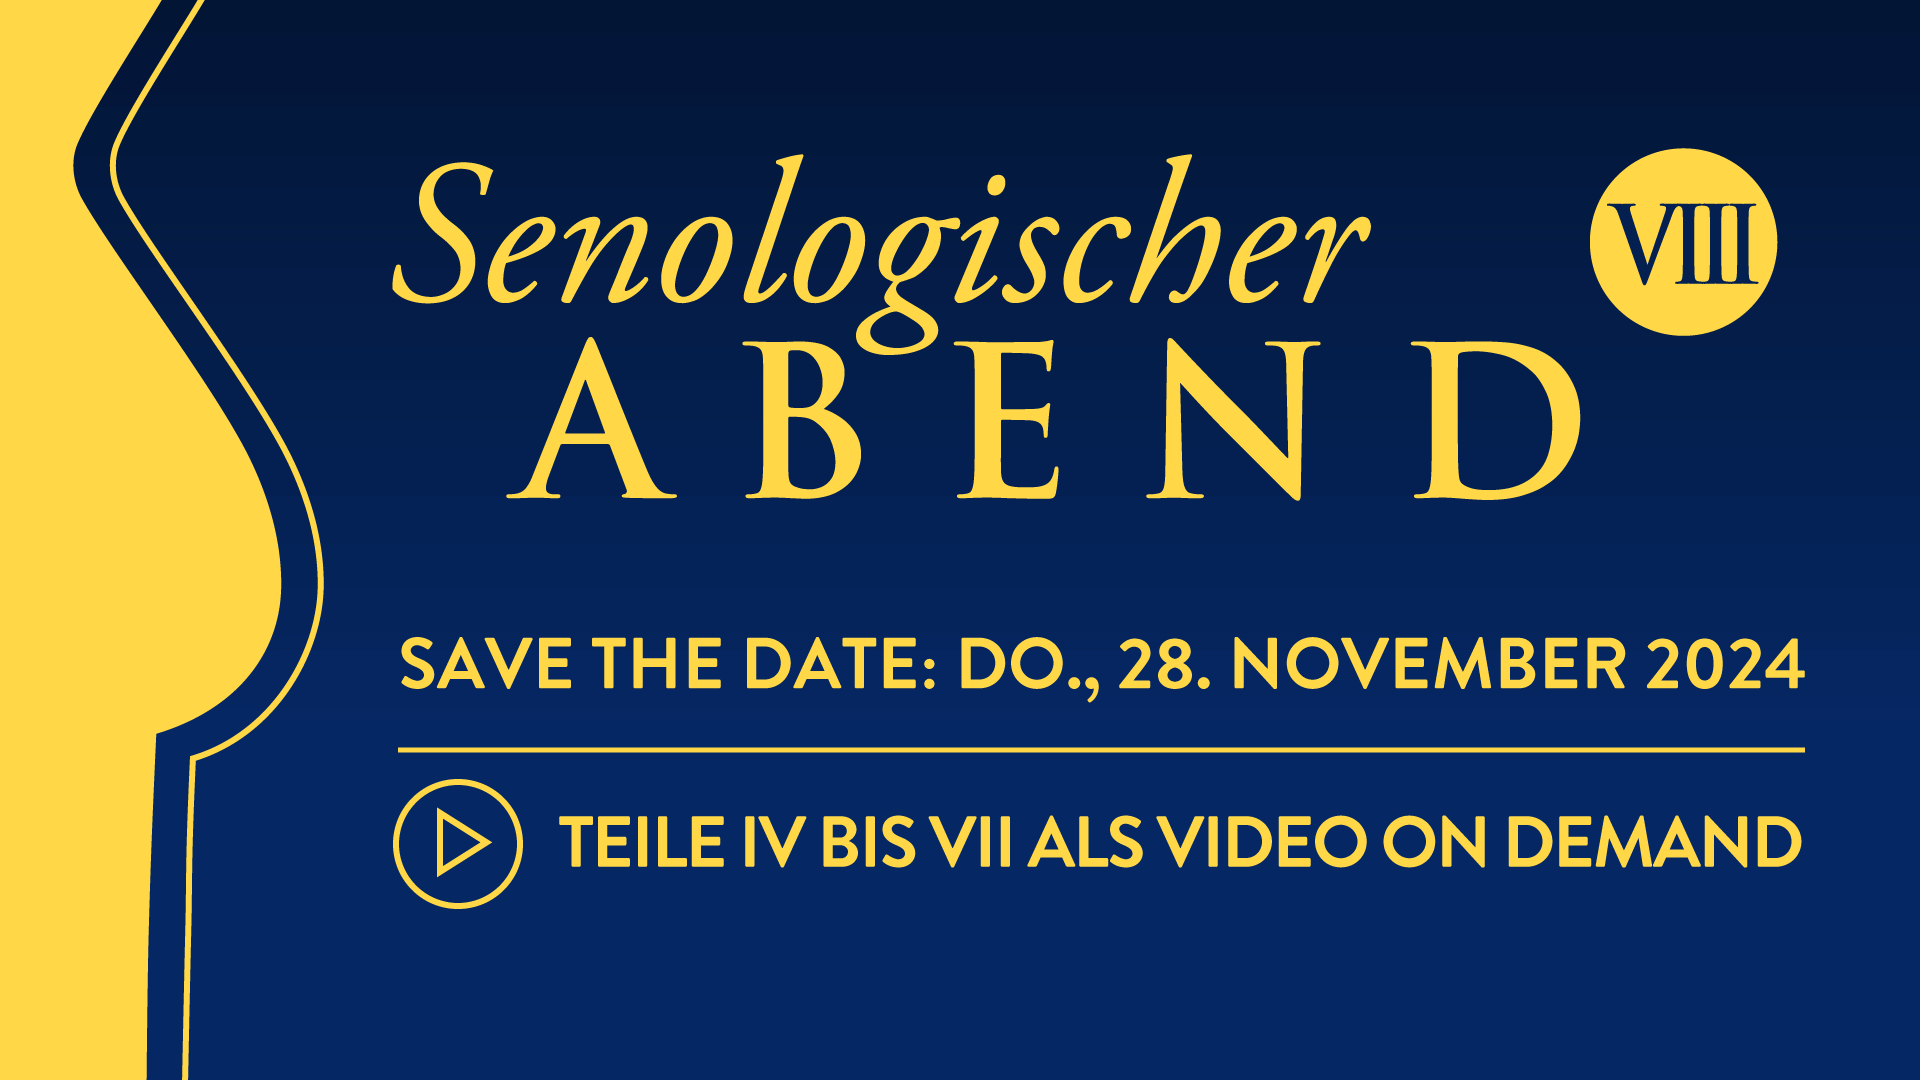 Senologischer Abend VII - Save the Date and Video on Demand